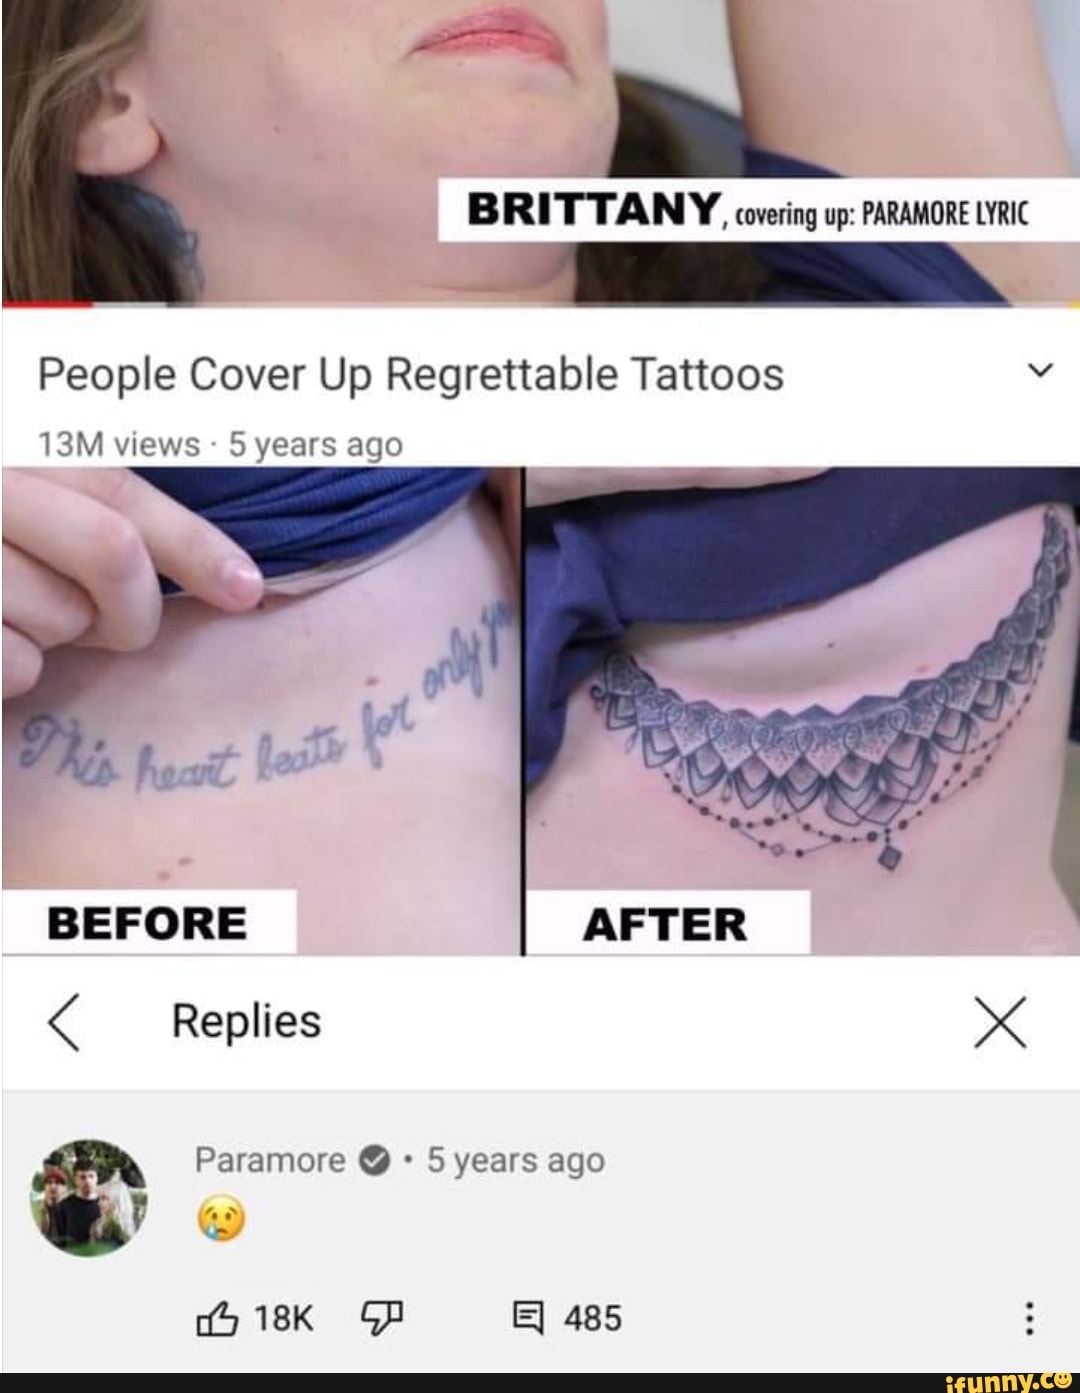 BRITTANY, covering up: PARAMORE LYRIC People Cover Up Regrettable Tattoos v  views - 5 years ago BEFORE AFTER < Replies Paramore @ 5 years ago E] 485 -  iFunny Brazil